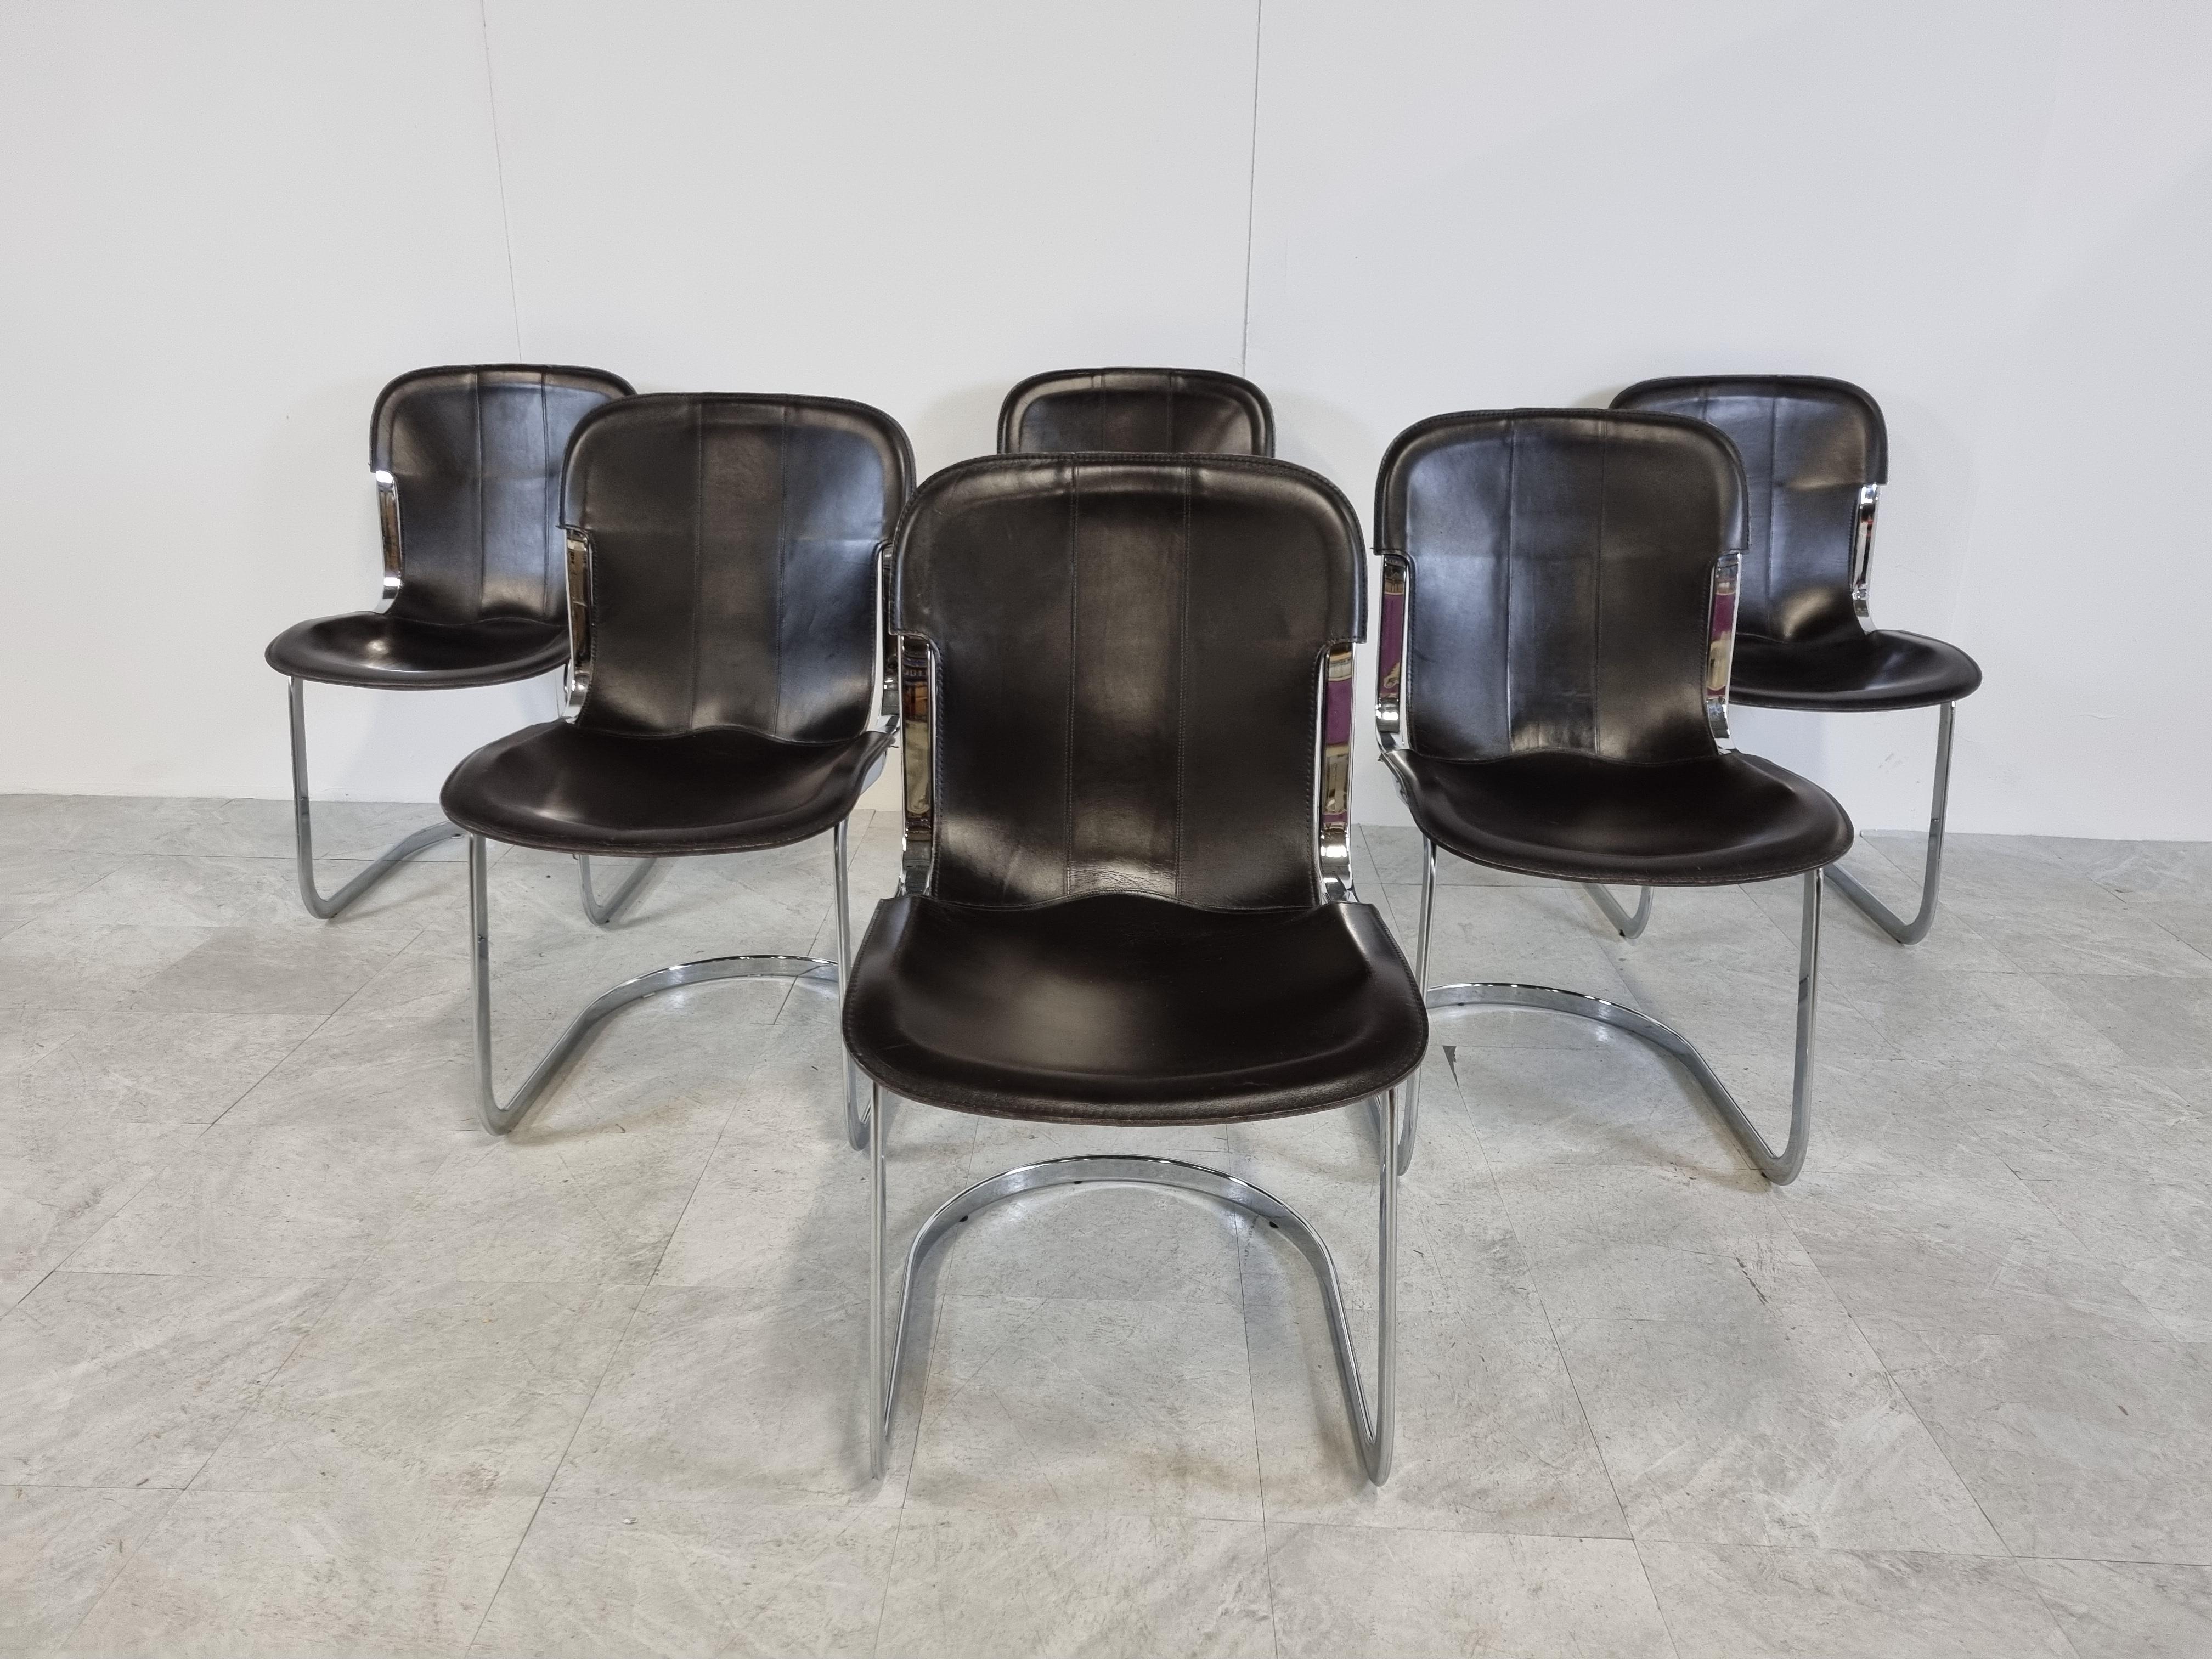 Chrome Vintage Dining Chairs by Willy Rizzo for Cidue Set of 6, 1970s